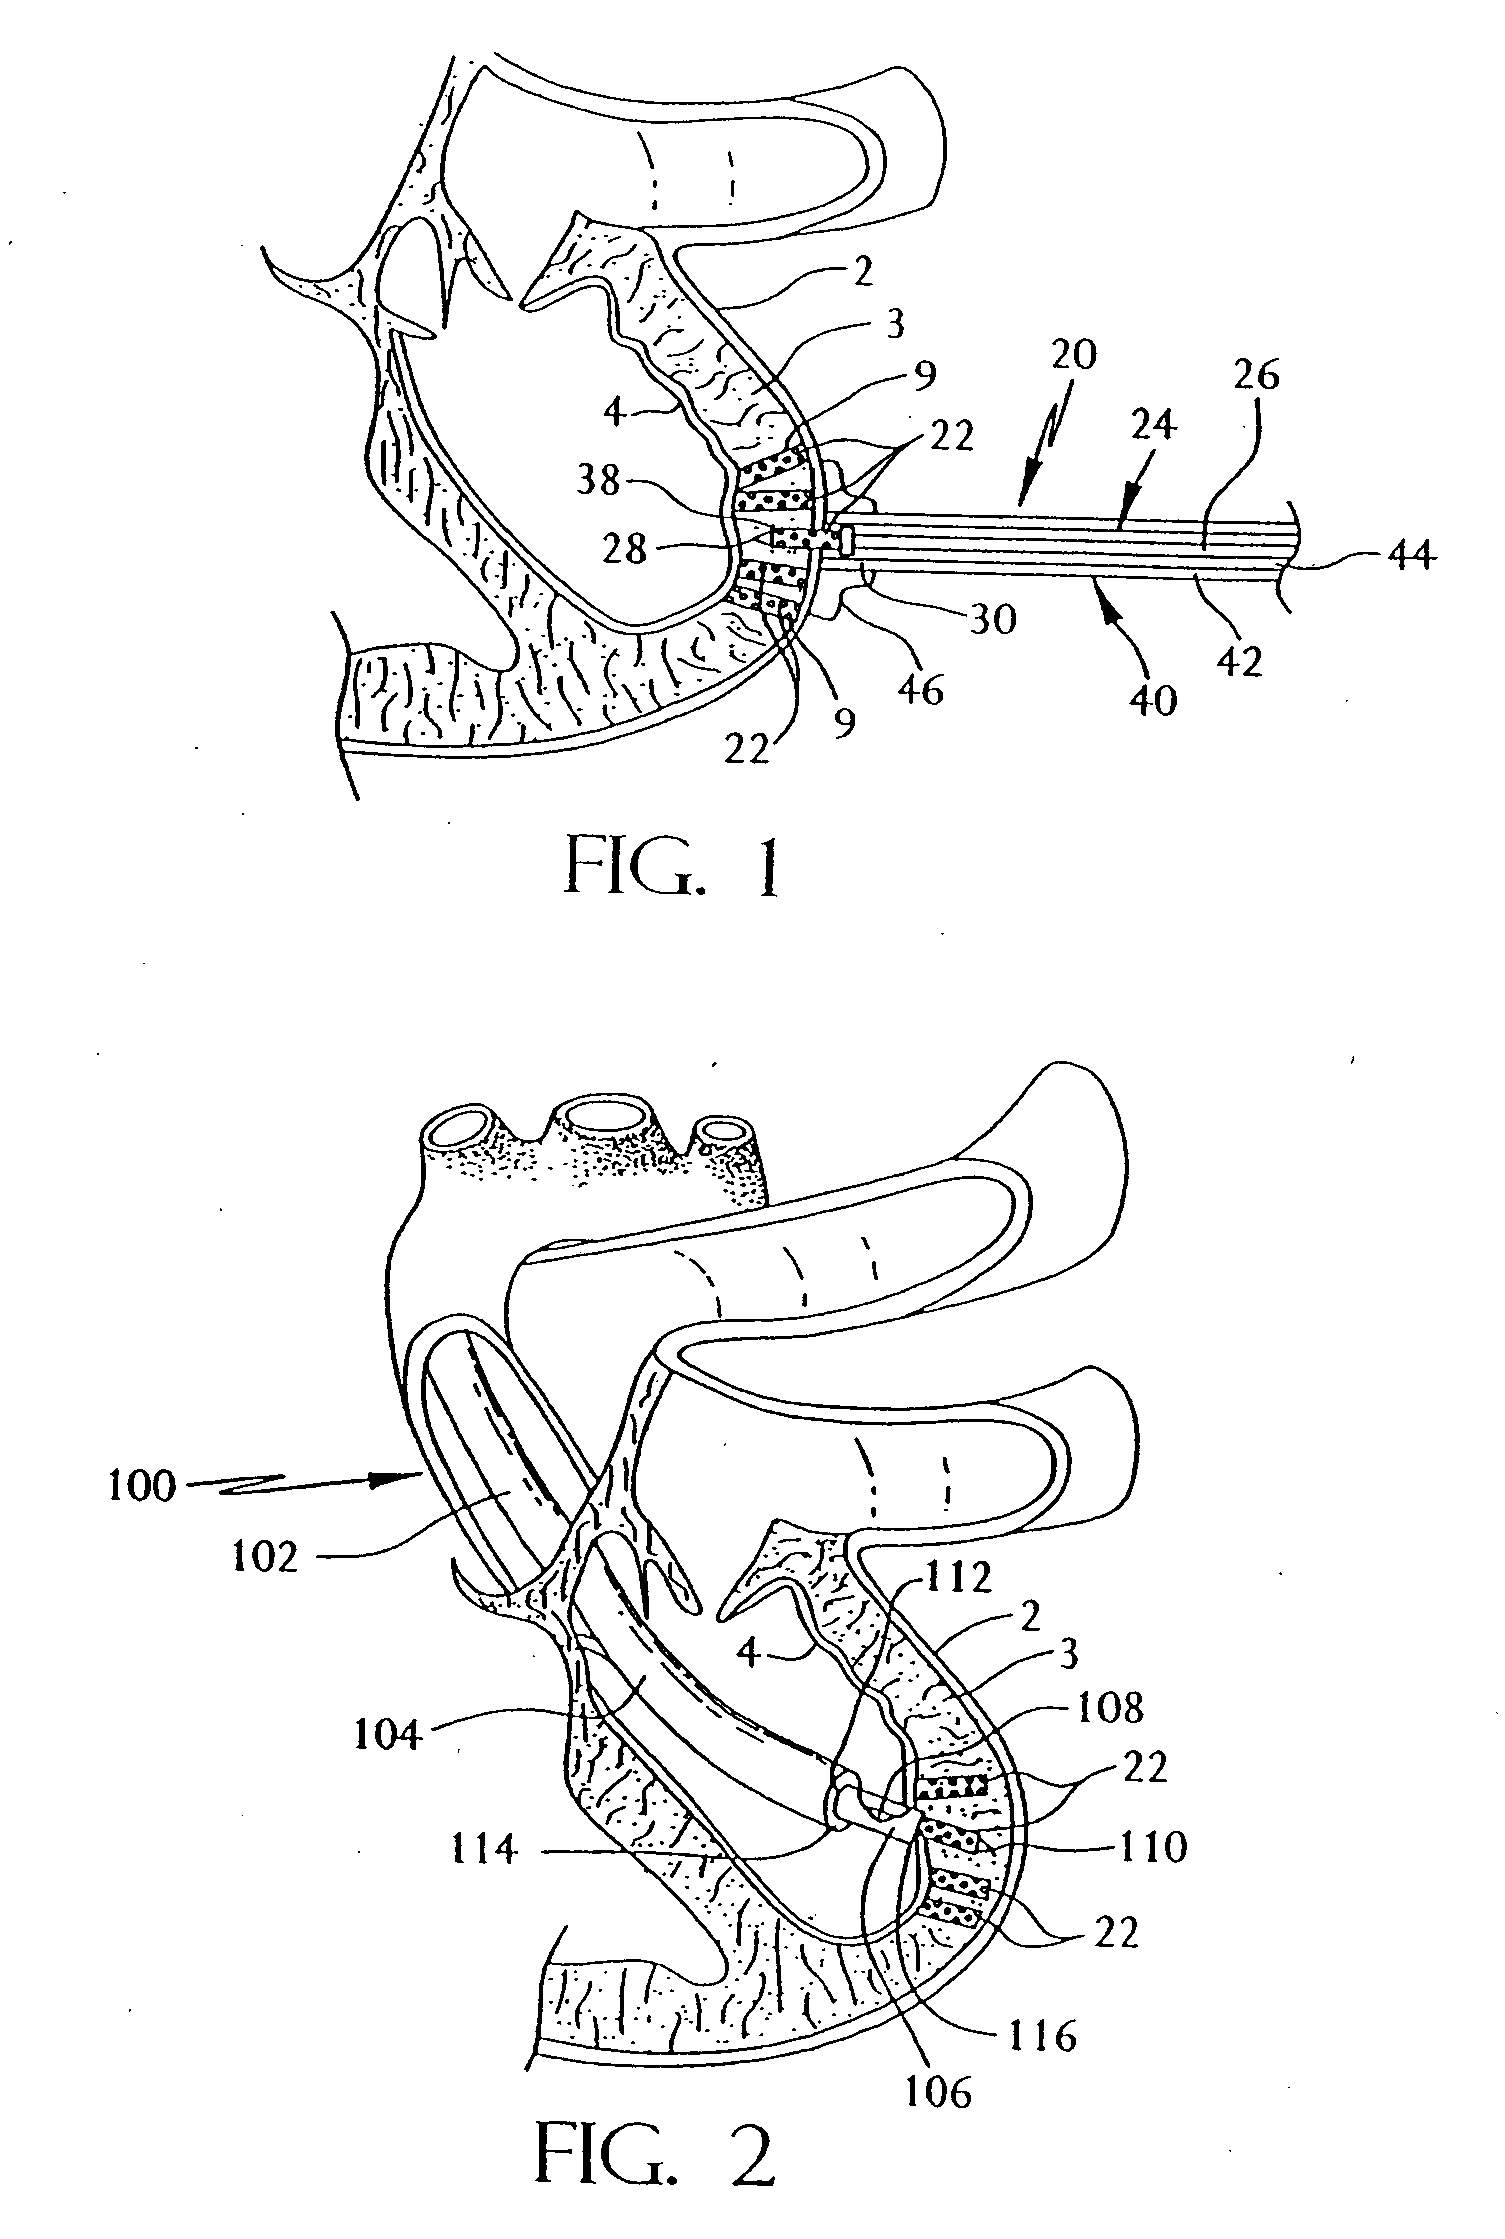 Transmyocardial revascularization system and method of use